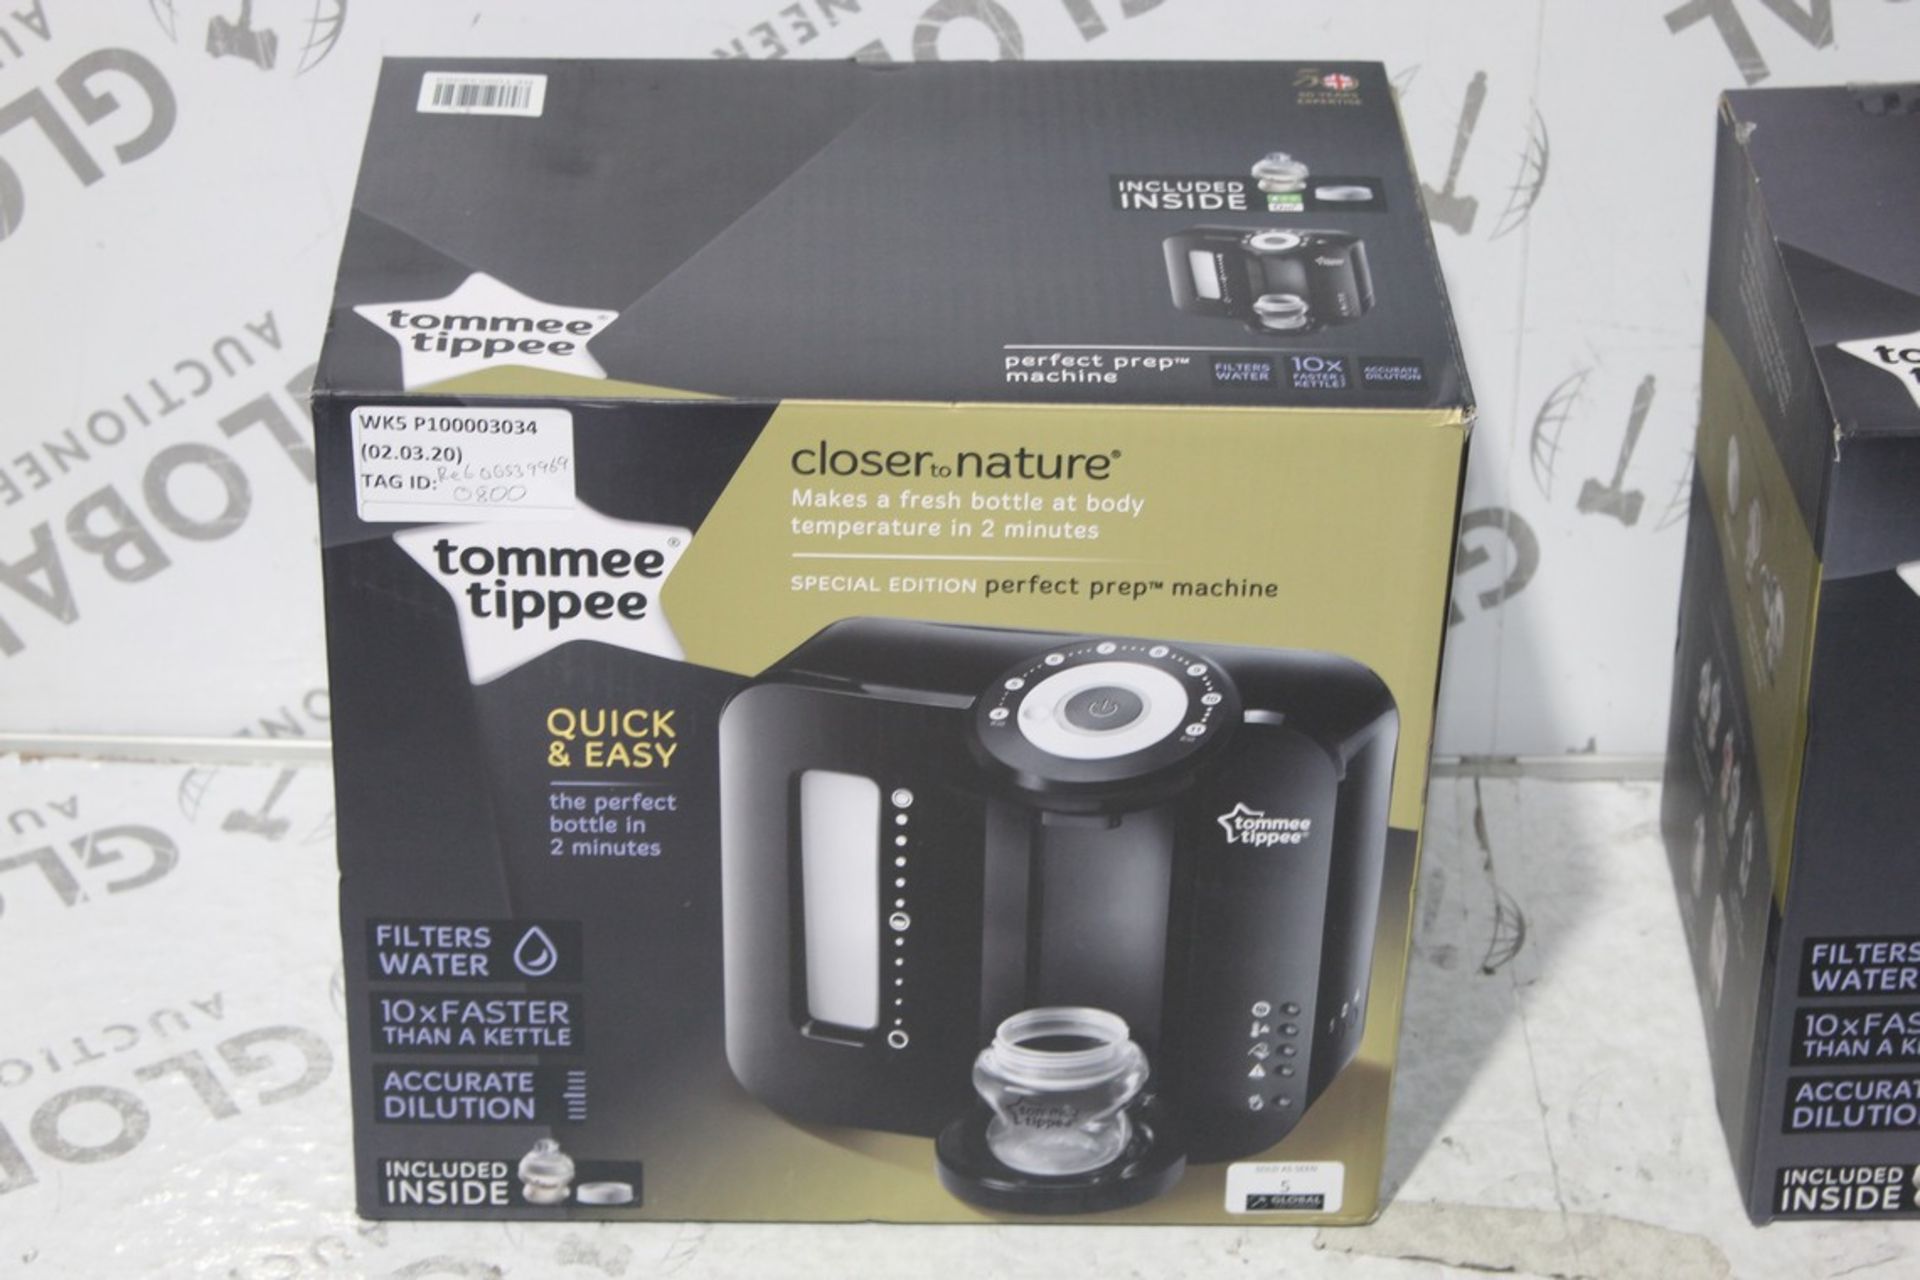 Boxed Tommee Tippee Closer to Nature Perfect Preparation Bottle Warming Station, Black Edition,